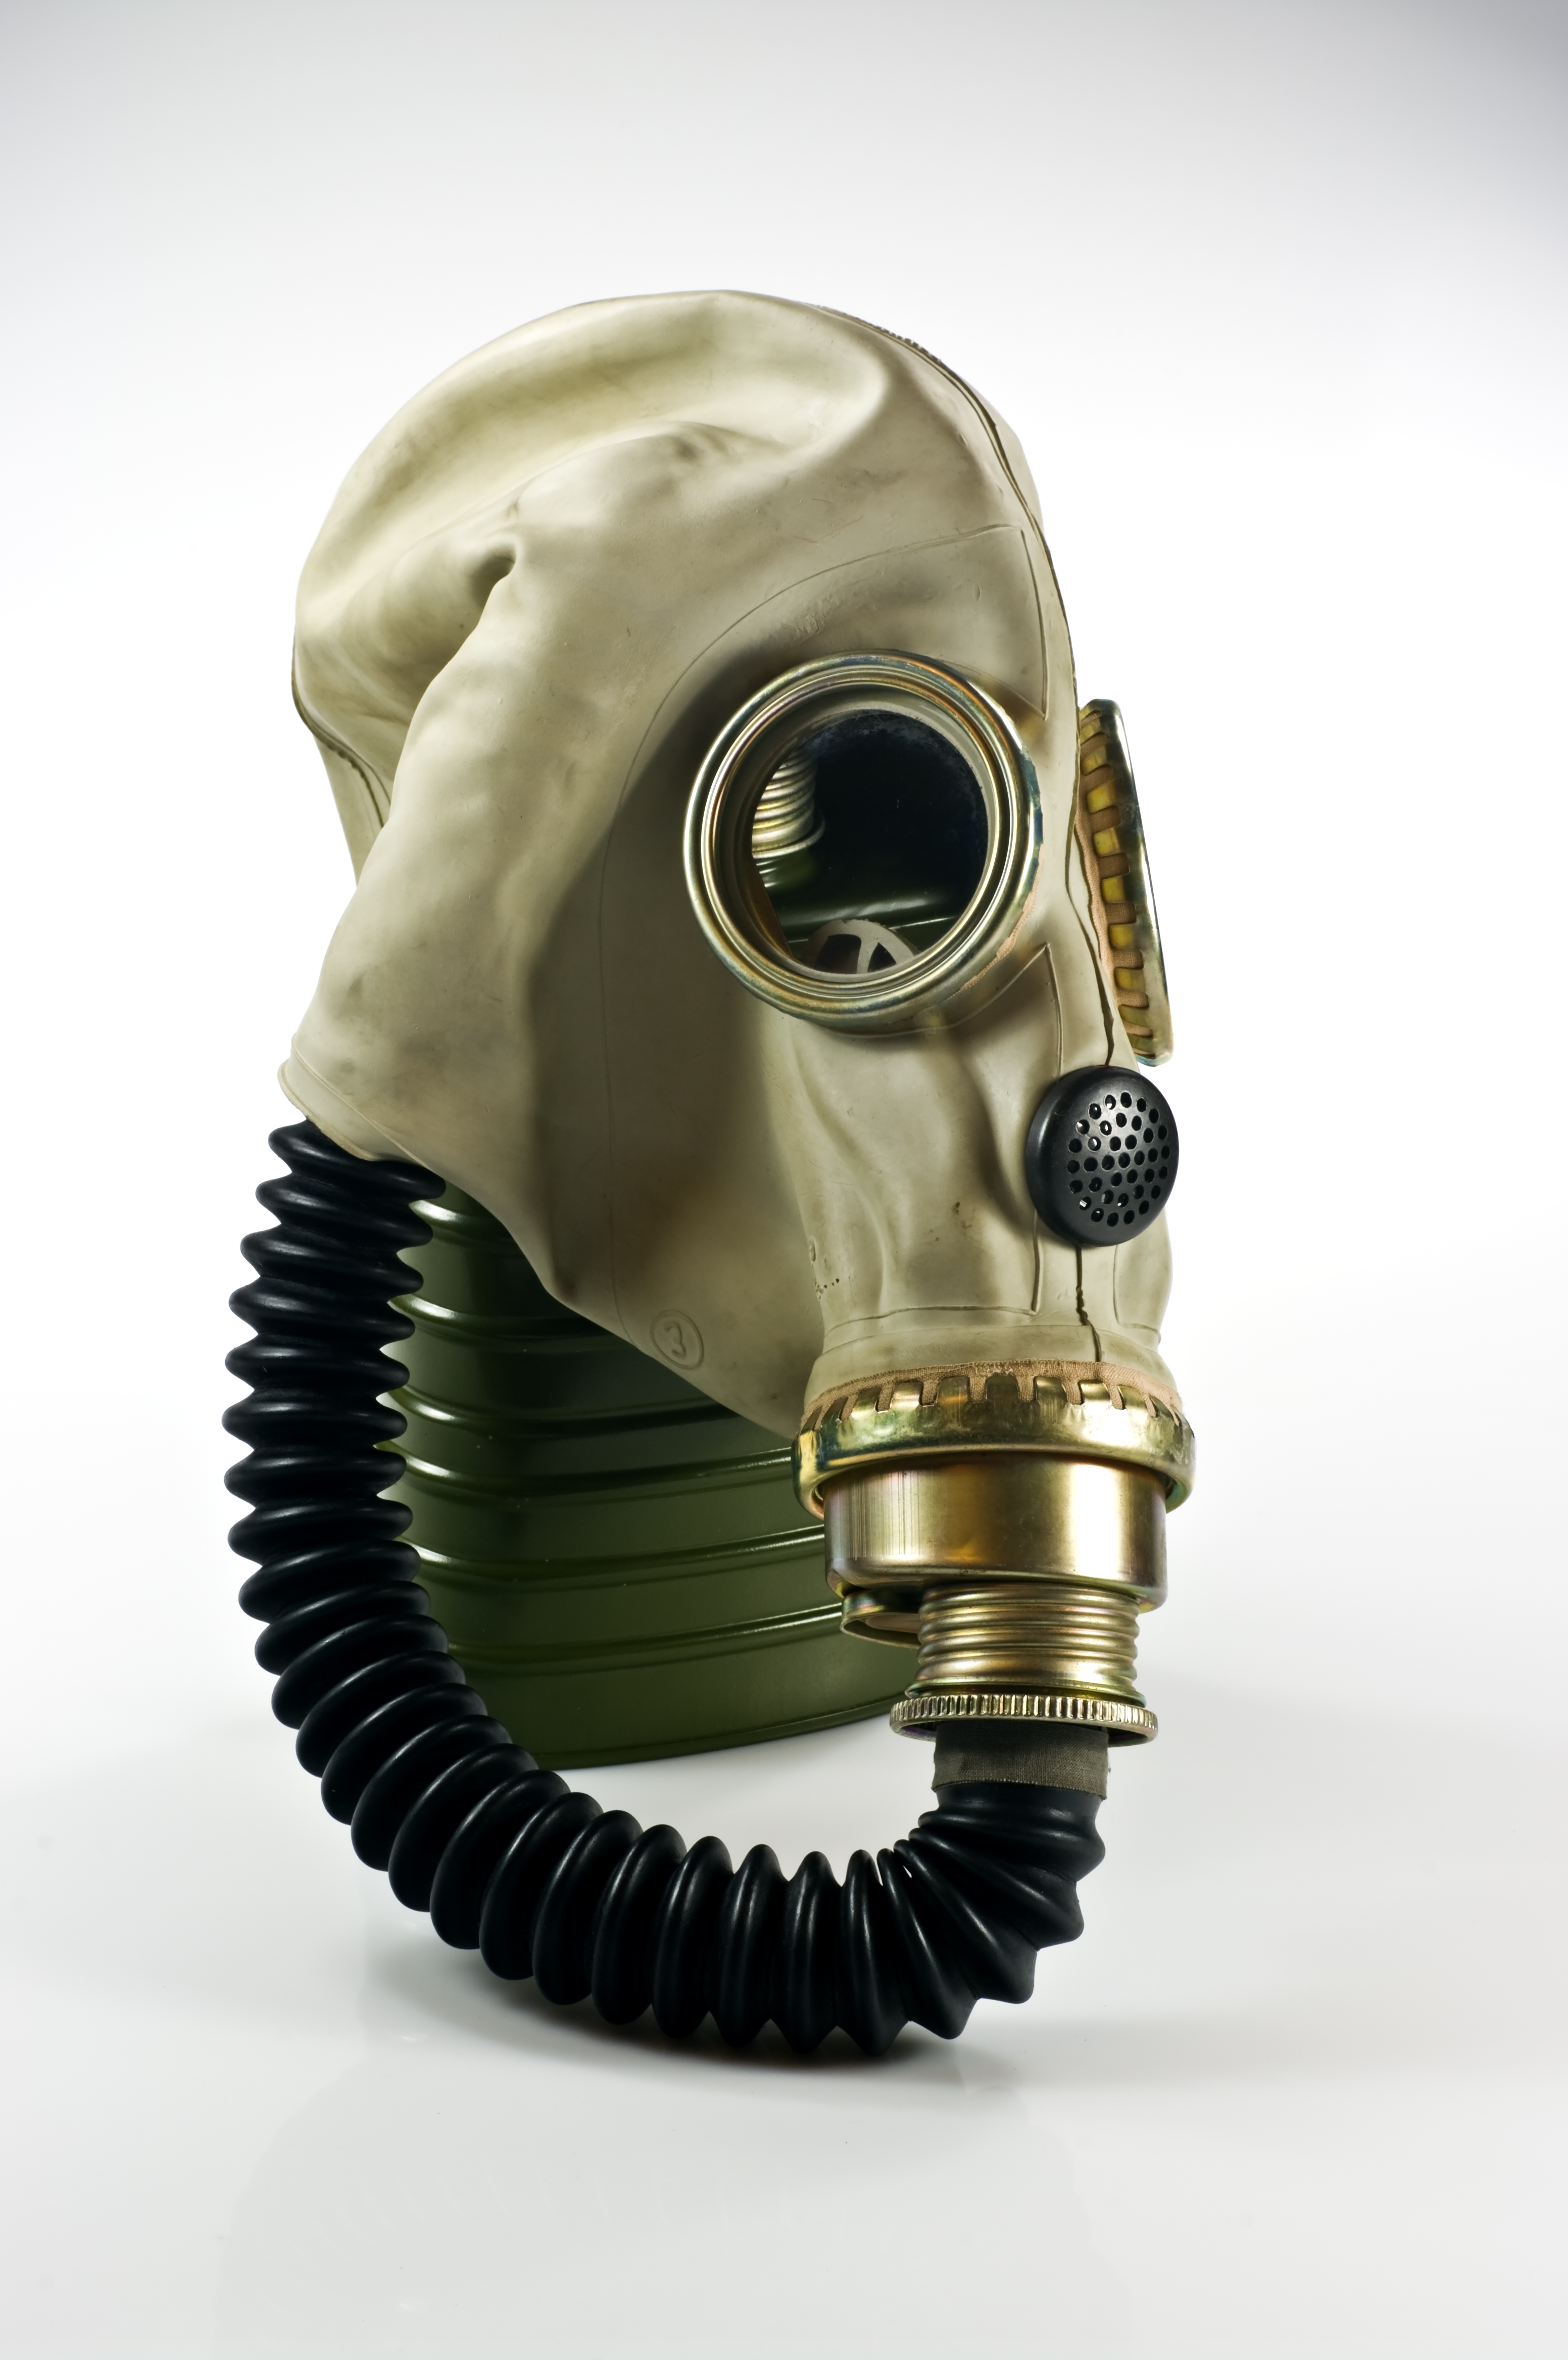 World Nuclear Protective Clothing Market Segmentation along with Regional Outlook, Growth Rate, Development Trend and Feasibility Studies 2023